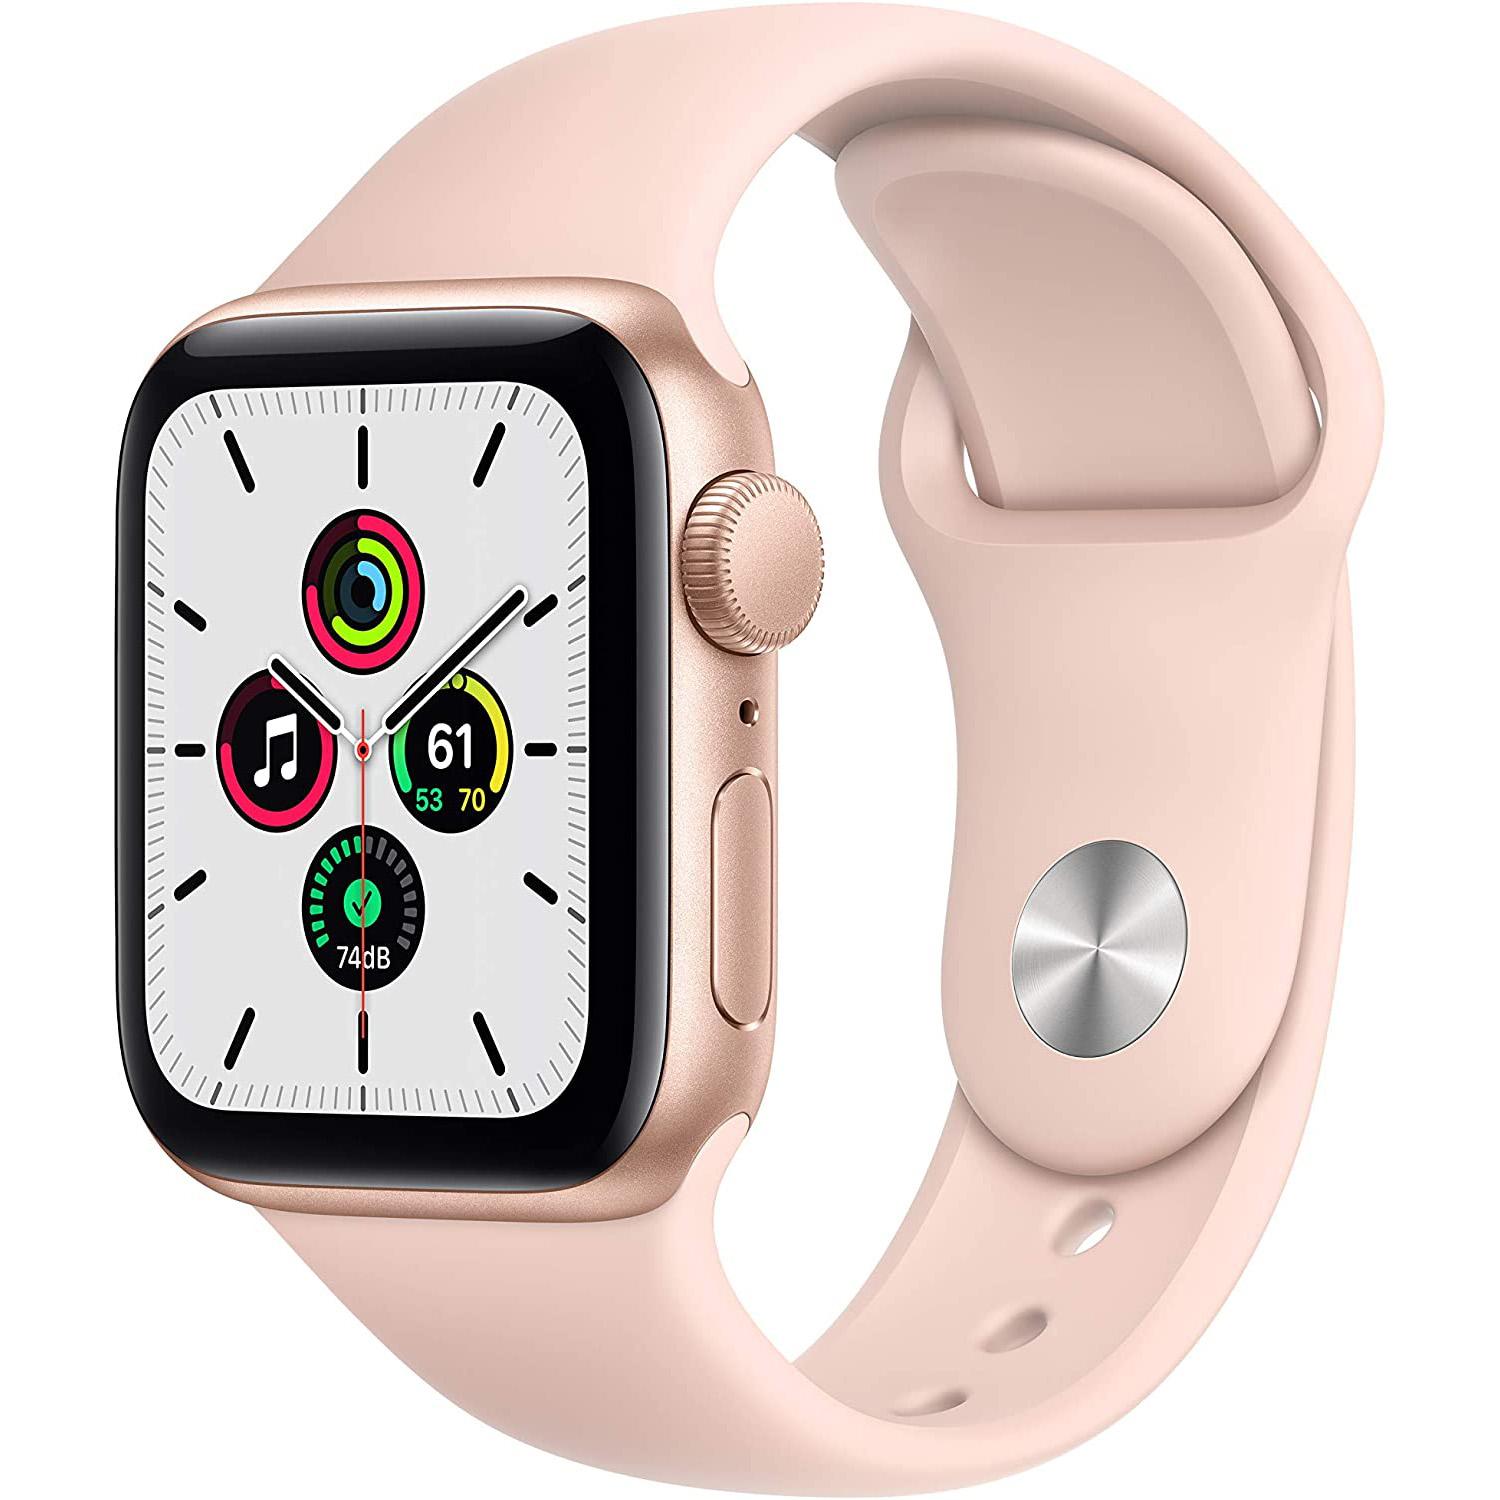 Apple Watch SE Smartwatch for $259 Shipped